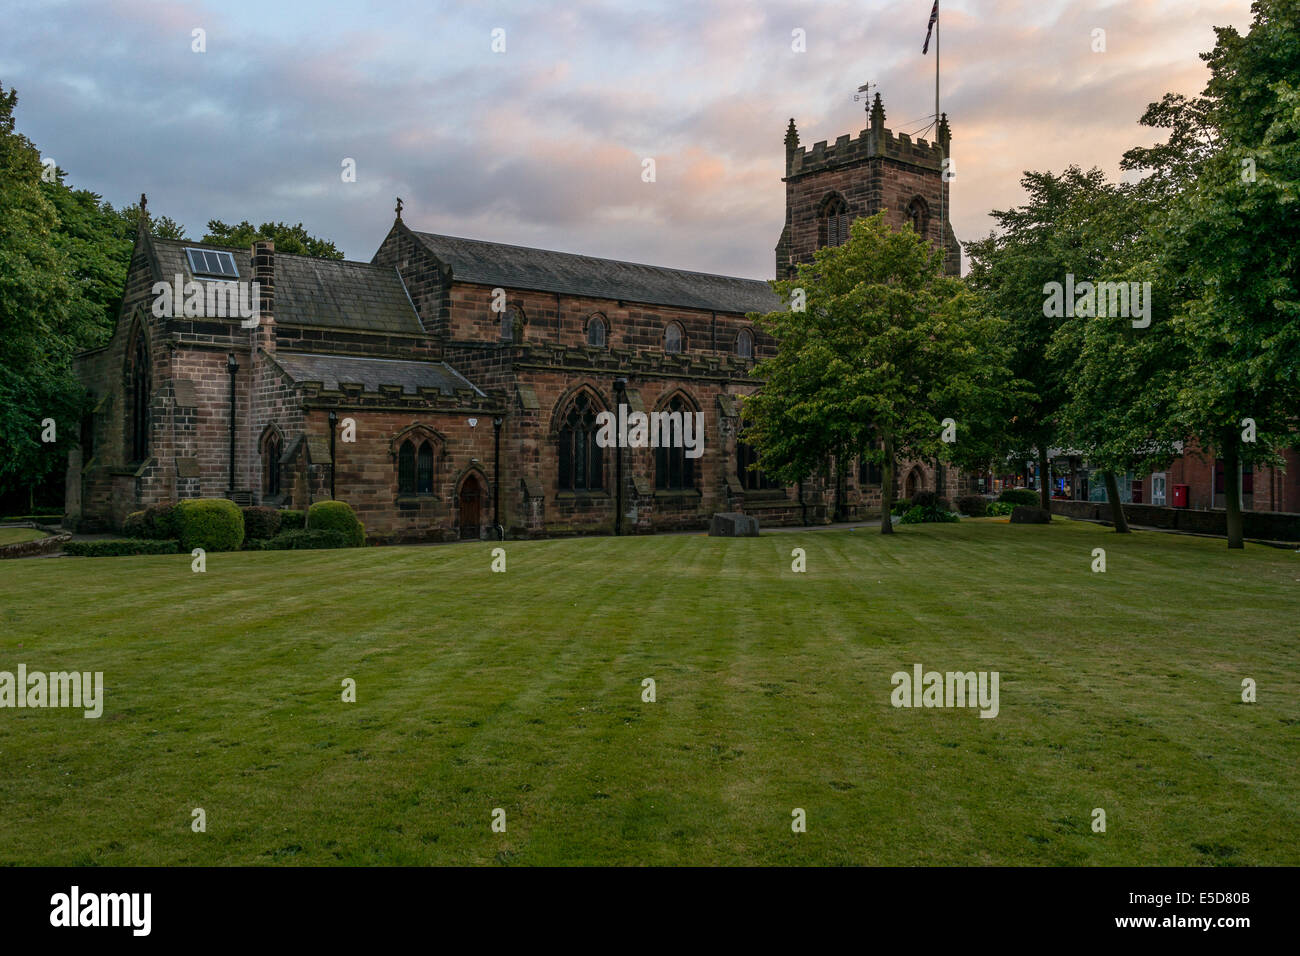 St Luke's Church in Cannock, Staffordshire, Royaume-Uni Banque D'Images